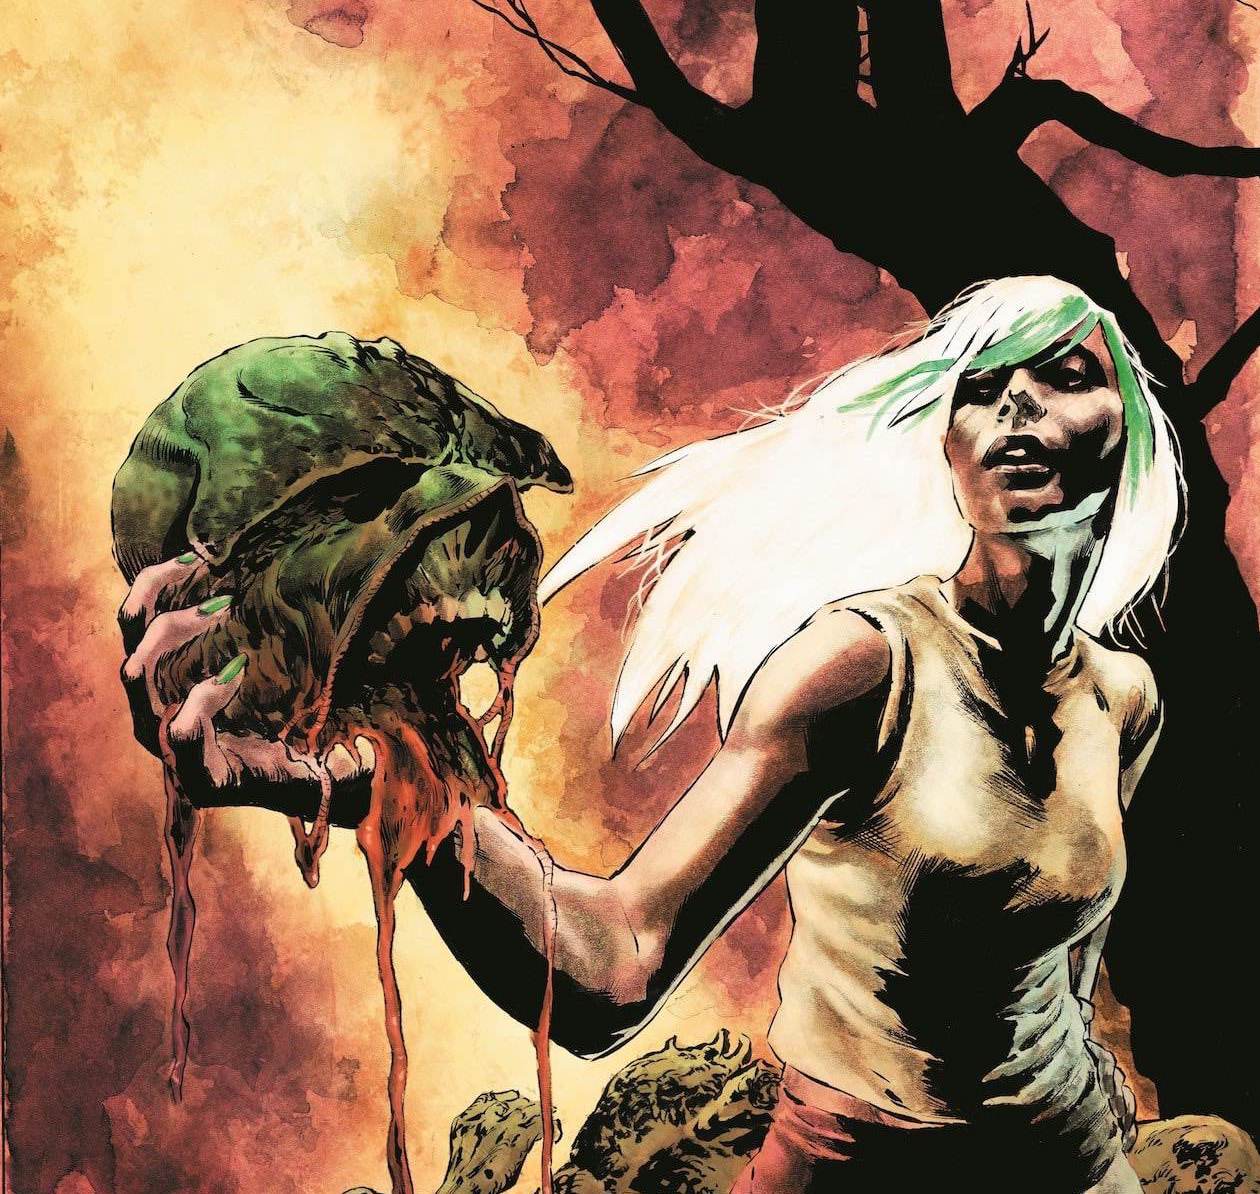 Exclusive previews: The Swamp Thing #10 and #11